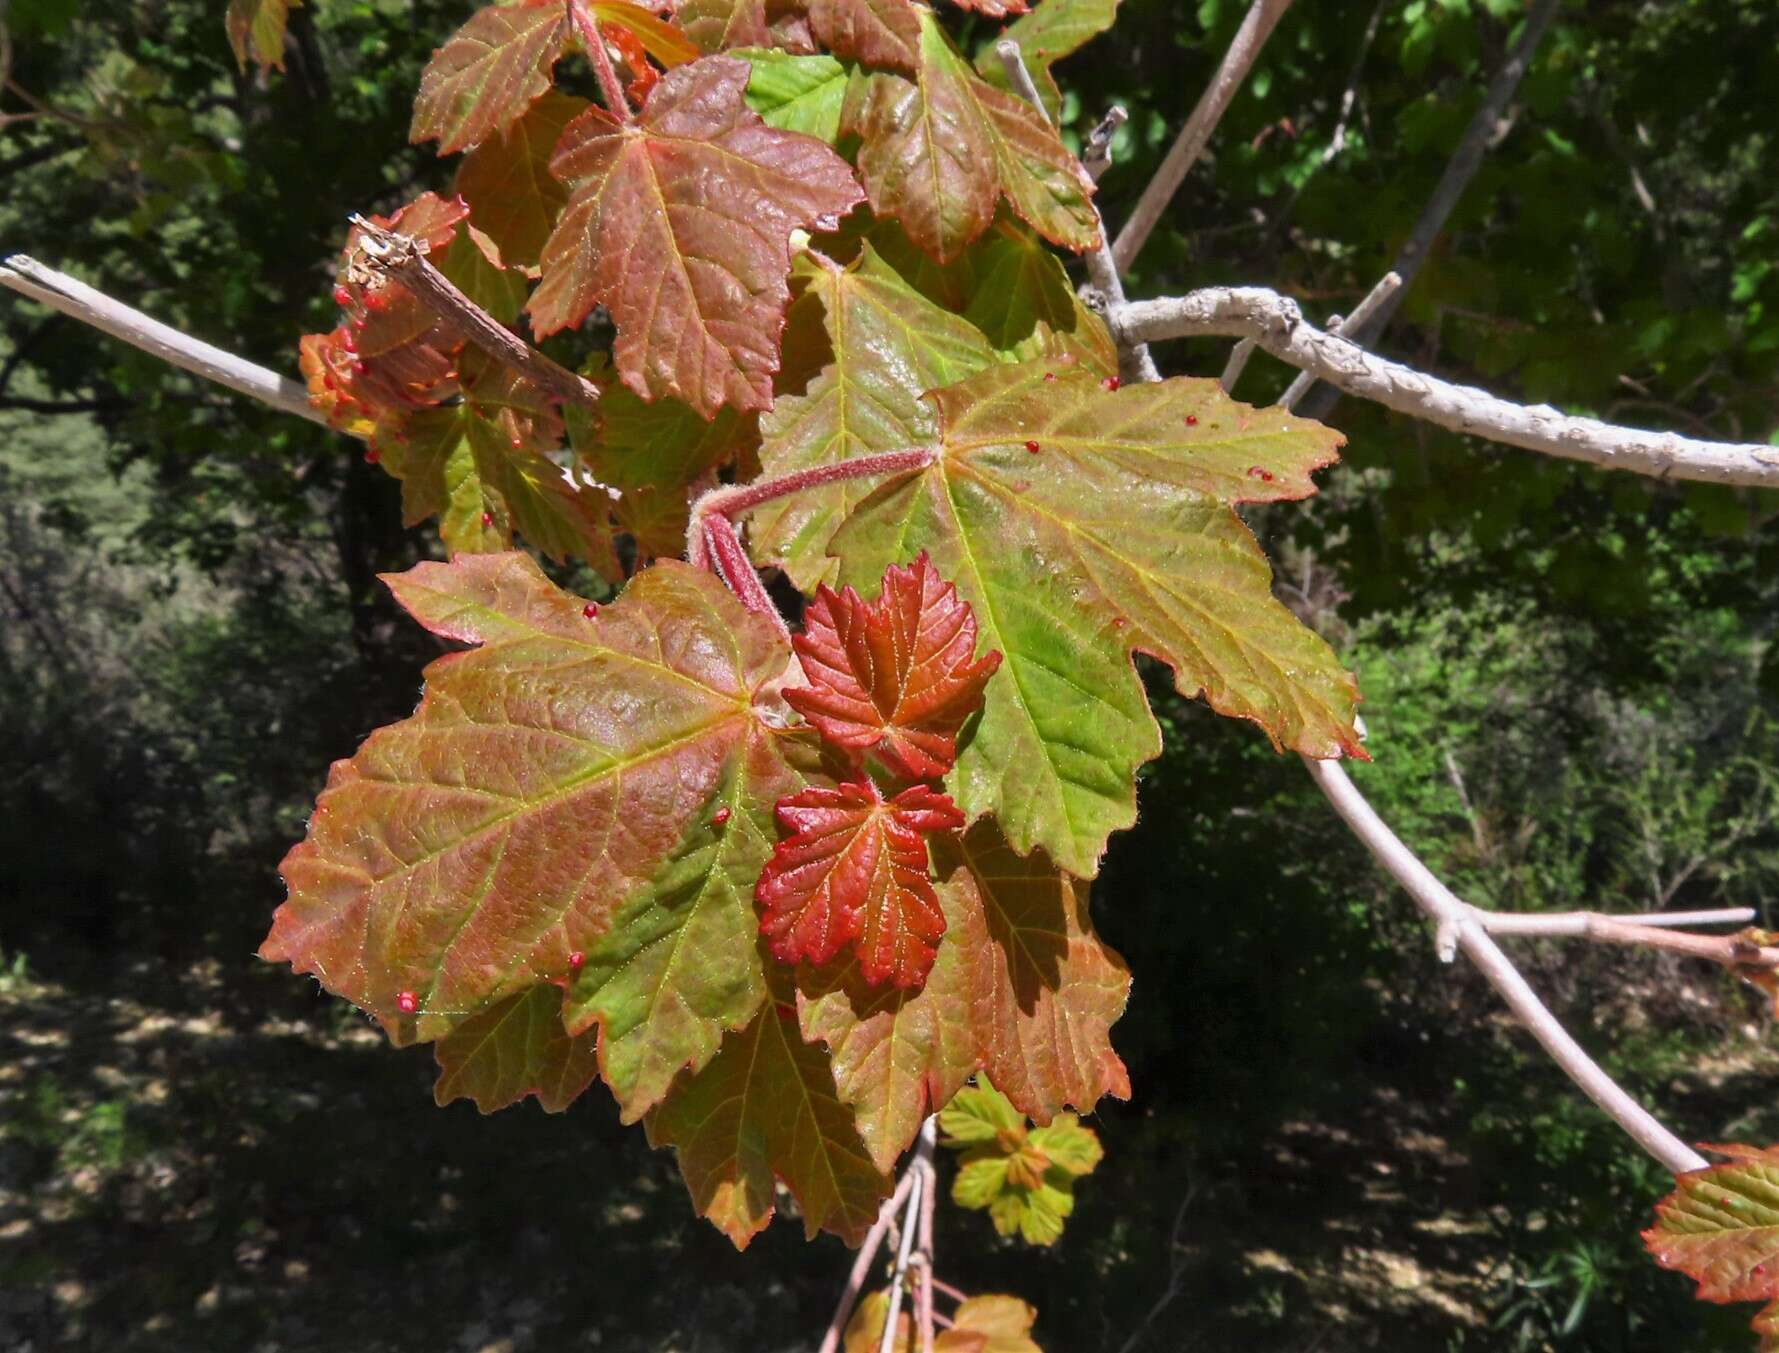 Image of Maple